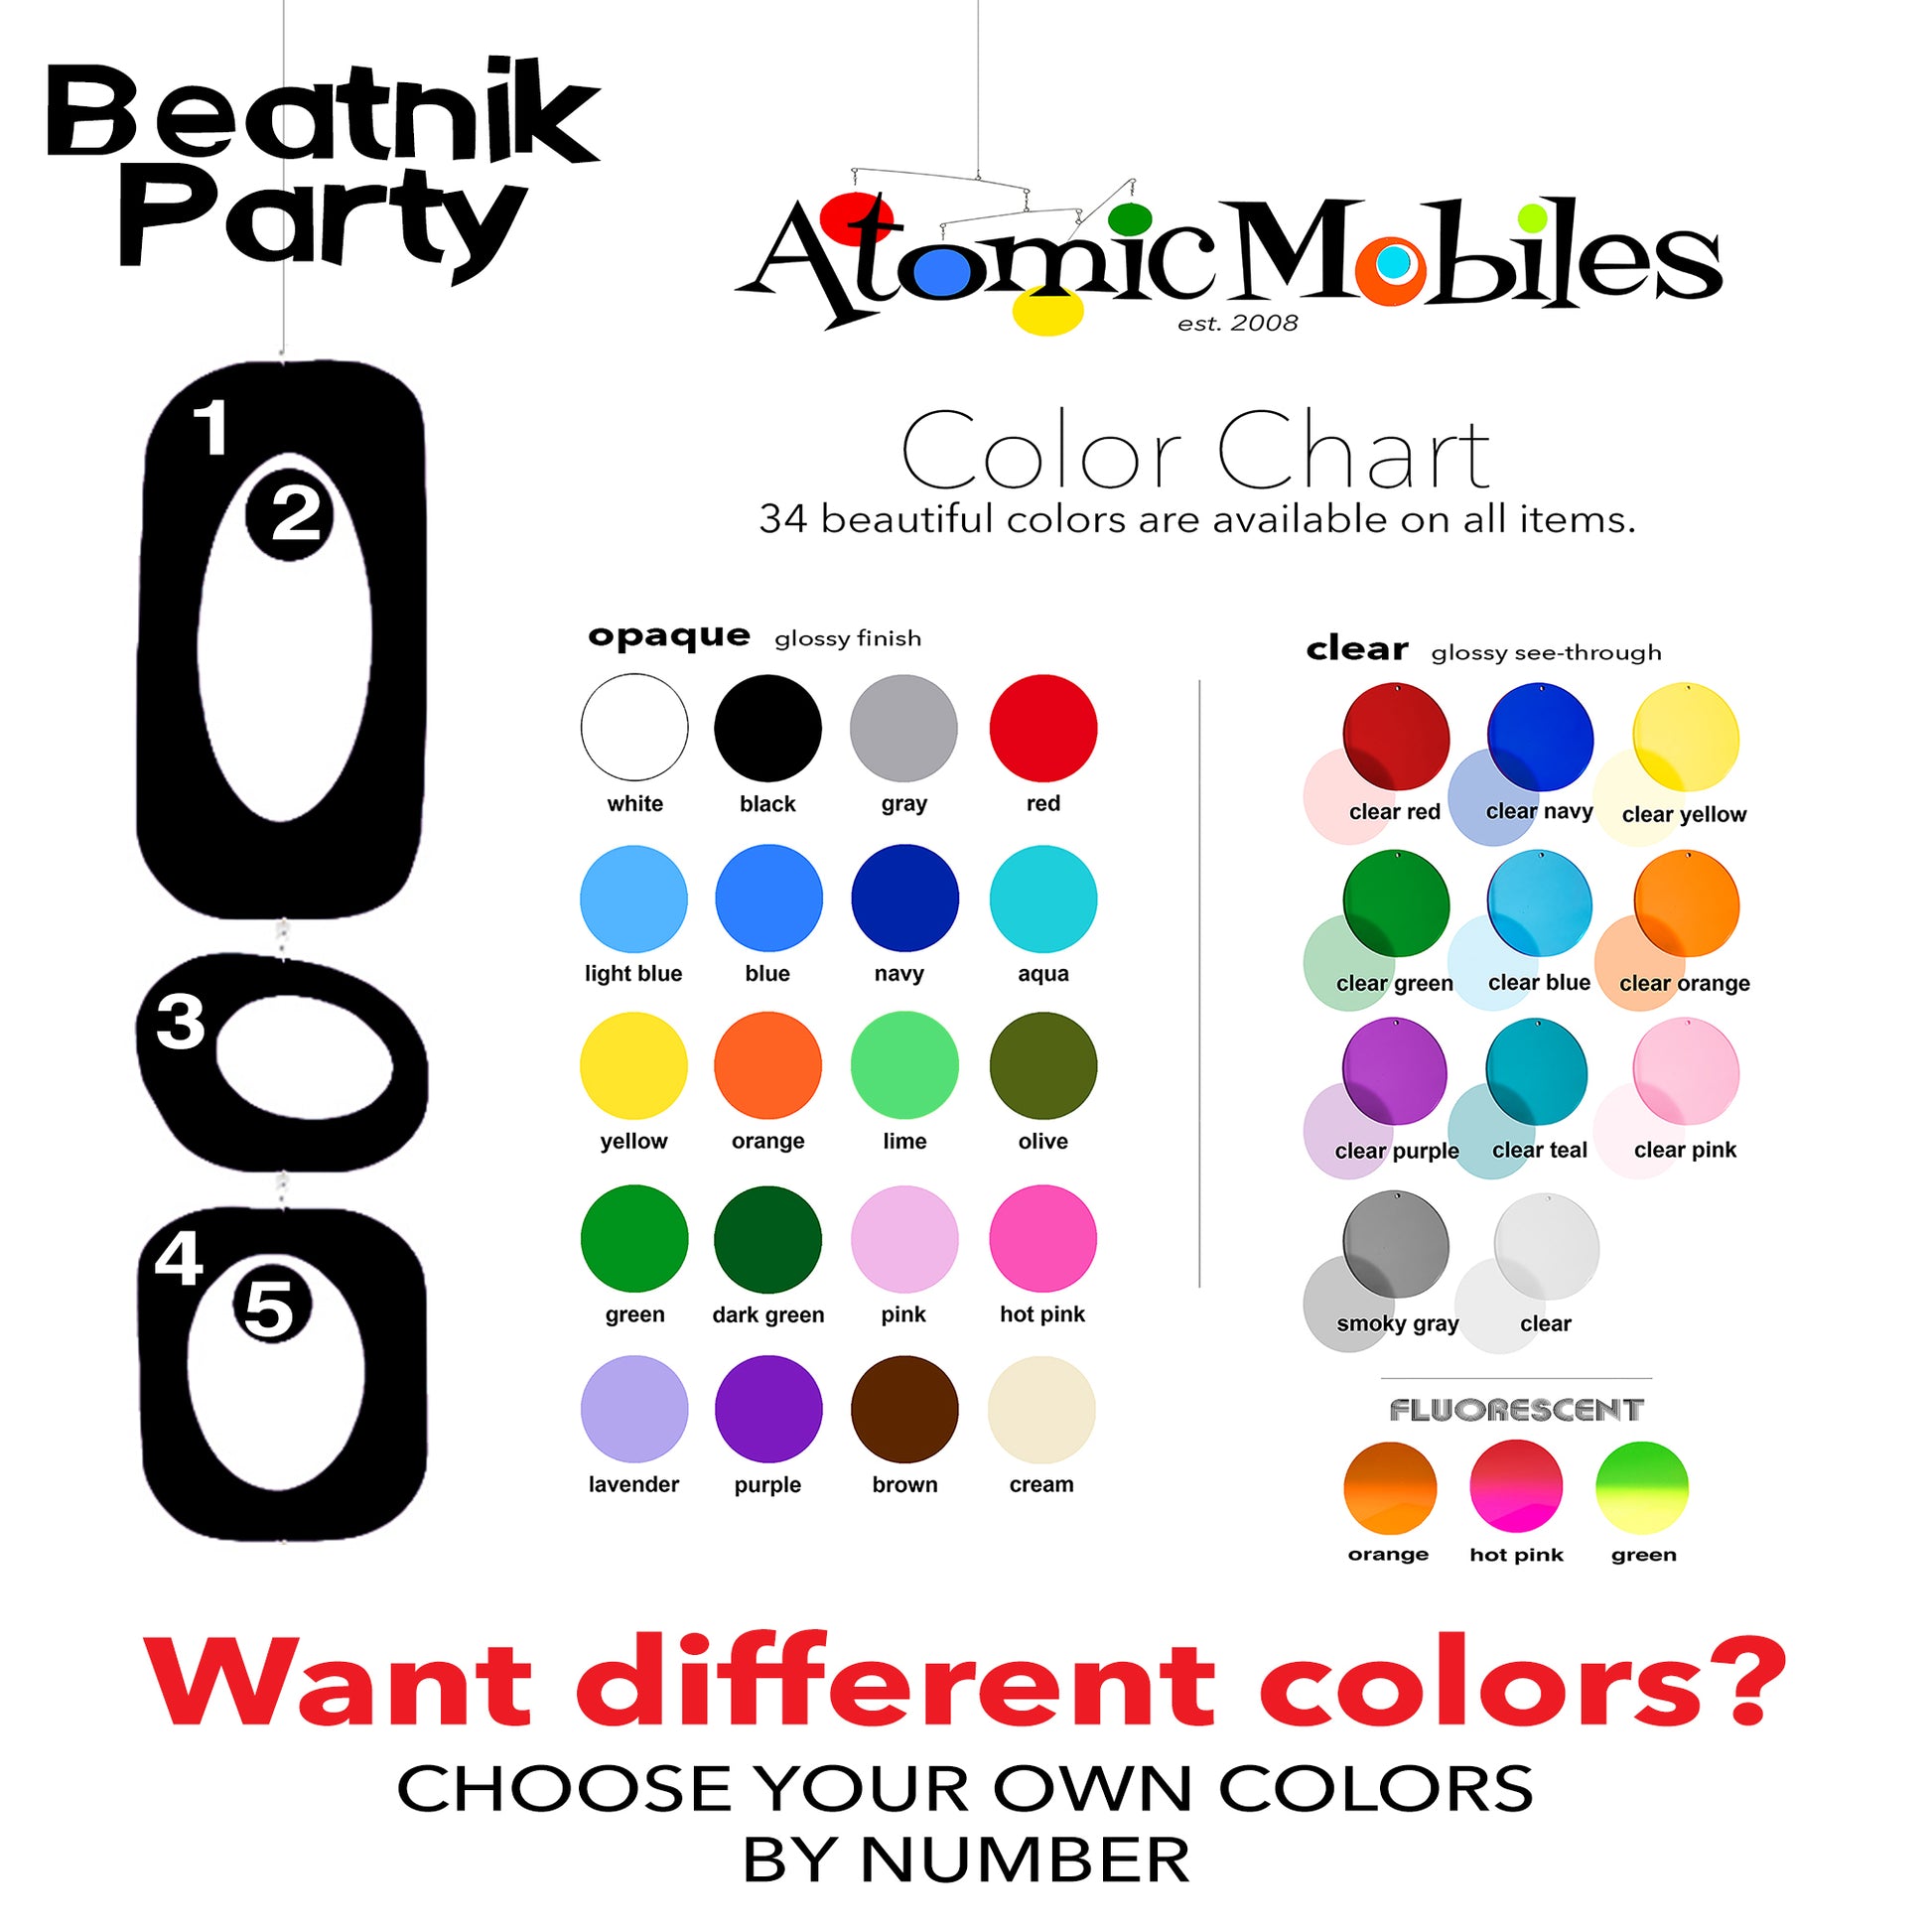 Color Chart for Beatnik Party DIY Art Mobile inspired by mid century modern retro style Kit by AtomicMobiles.com